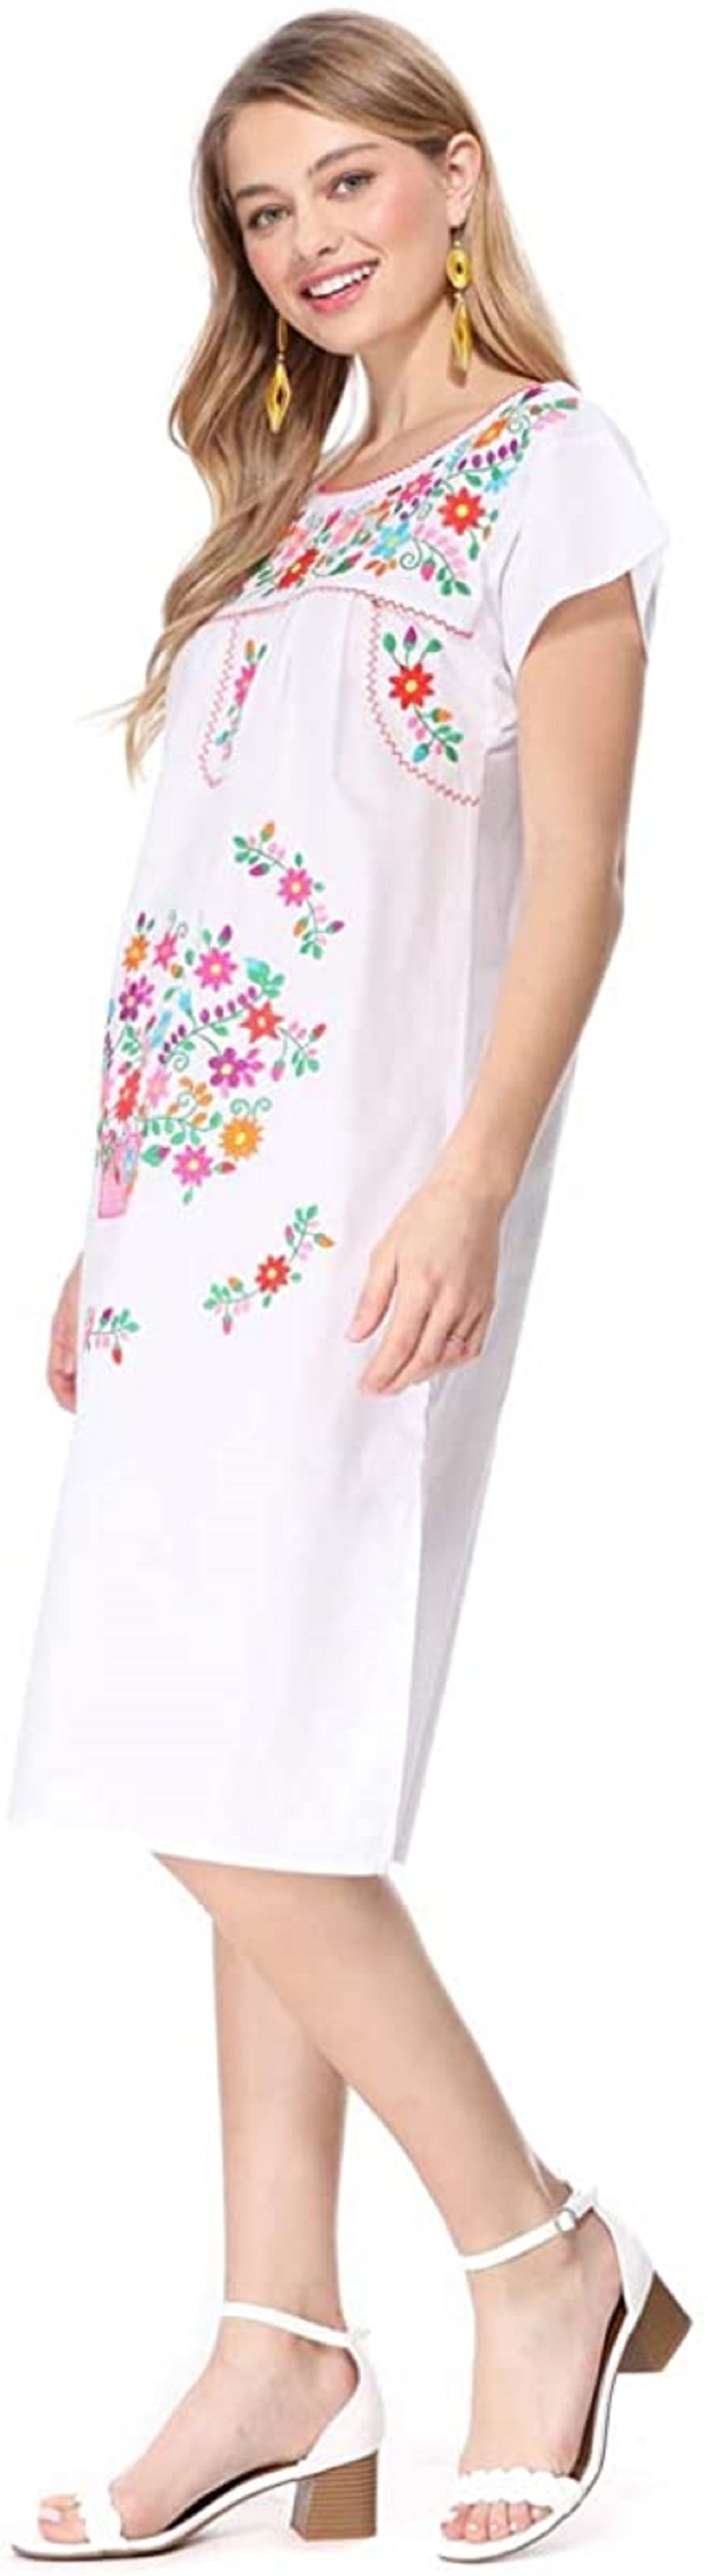 Zang Fashion Women's Puebla Mexican Inspired Traditional Floral Embroidered  Shirt Dress Casual Female 